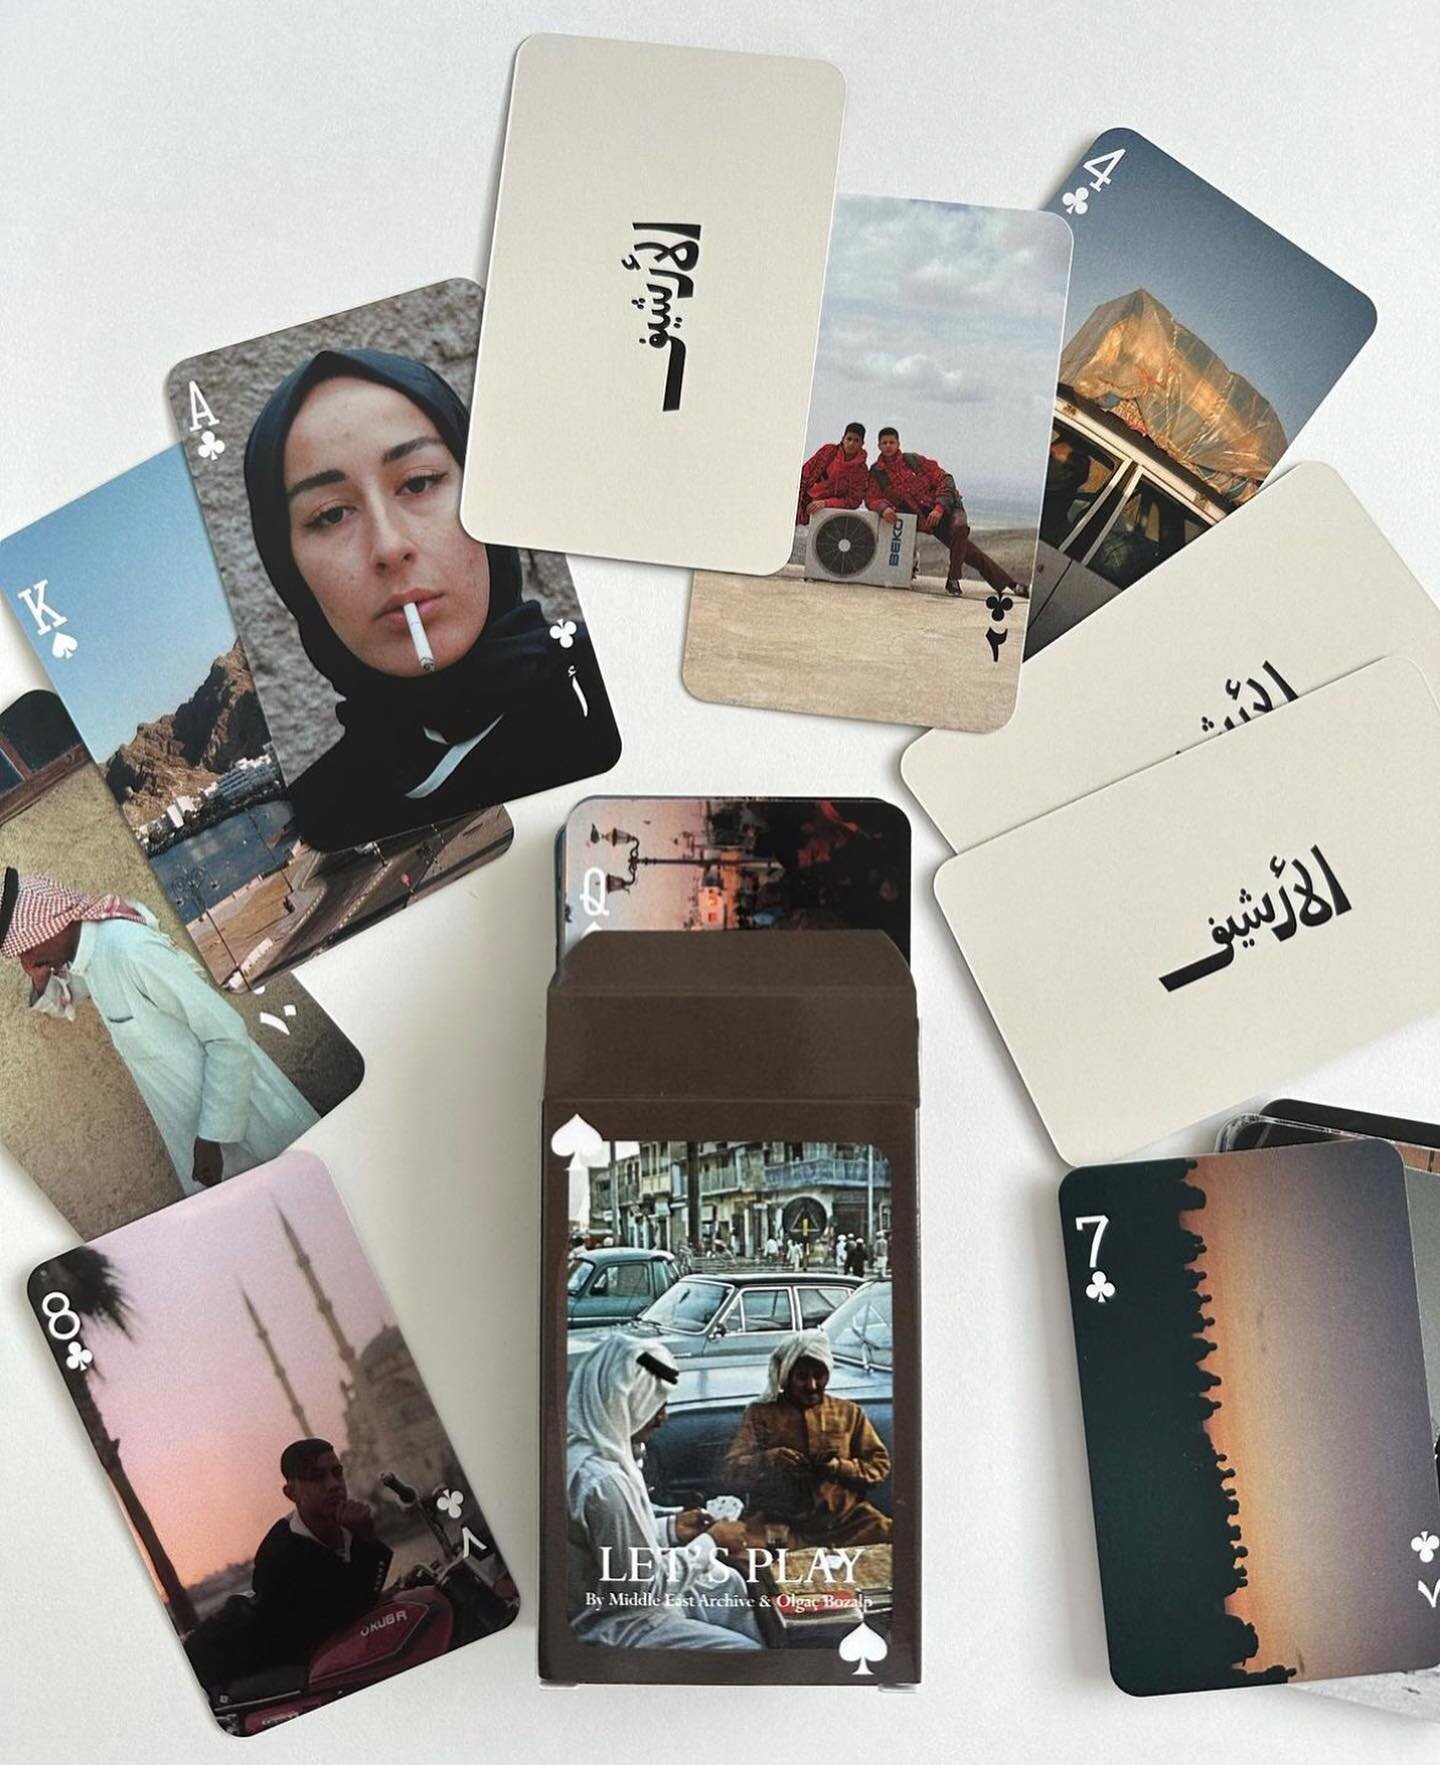 Accompanied by many cups of tea, Middle-Eastern traditions embrace the beauty of a pack of cards. To be displayed and shared around the table, bringing togetherness, joy, and de-stress within daily lives. Embracing life's little pleasures, the @middl